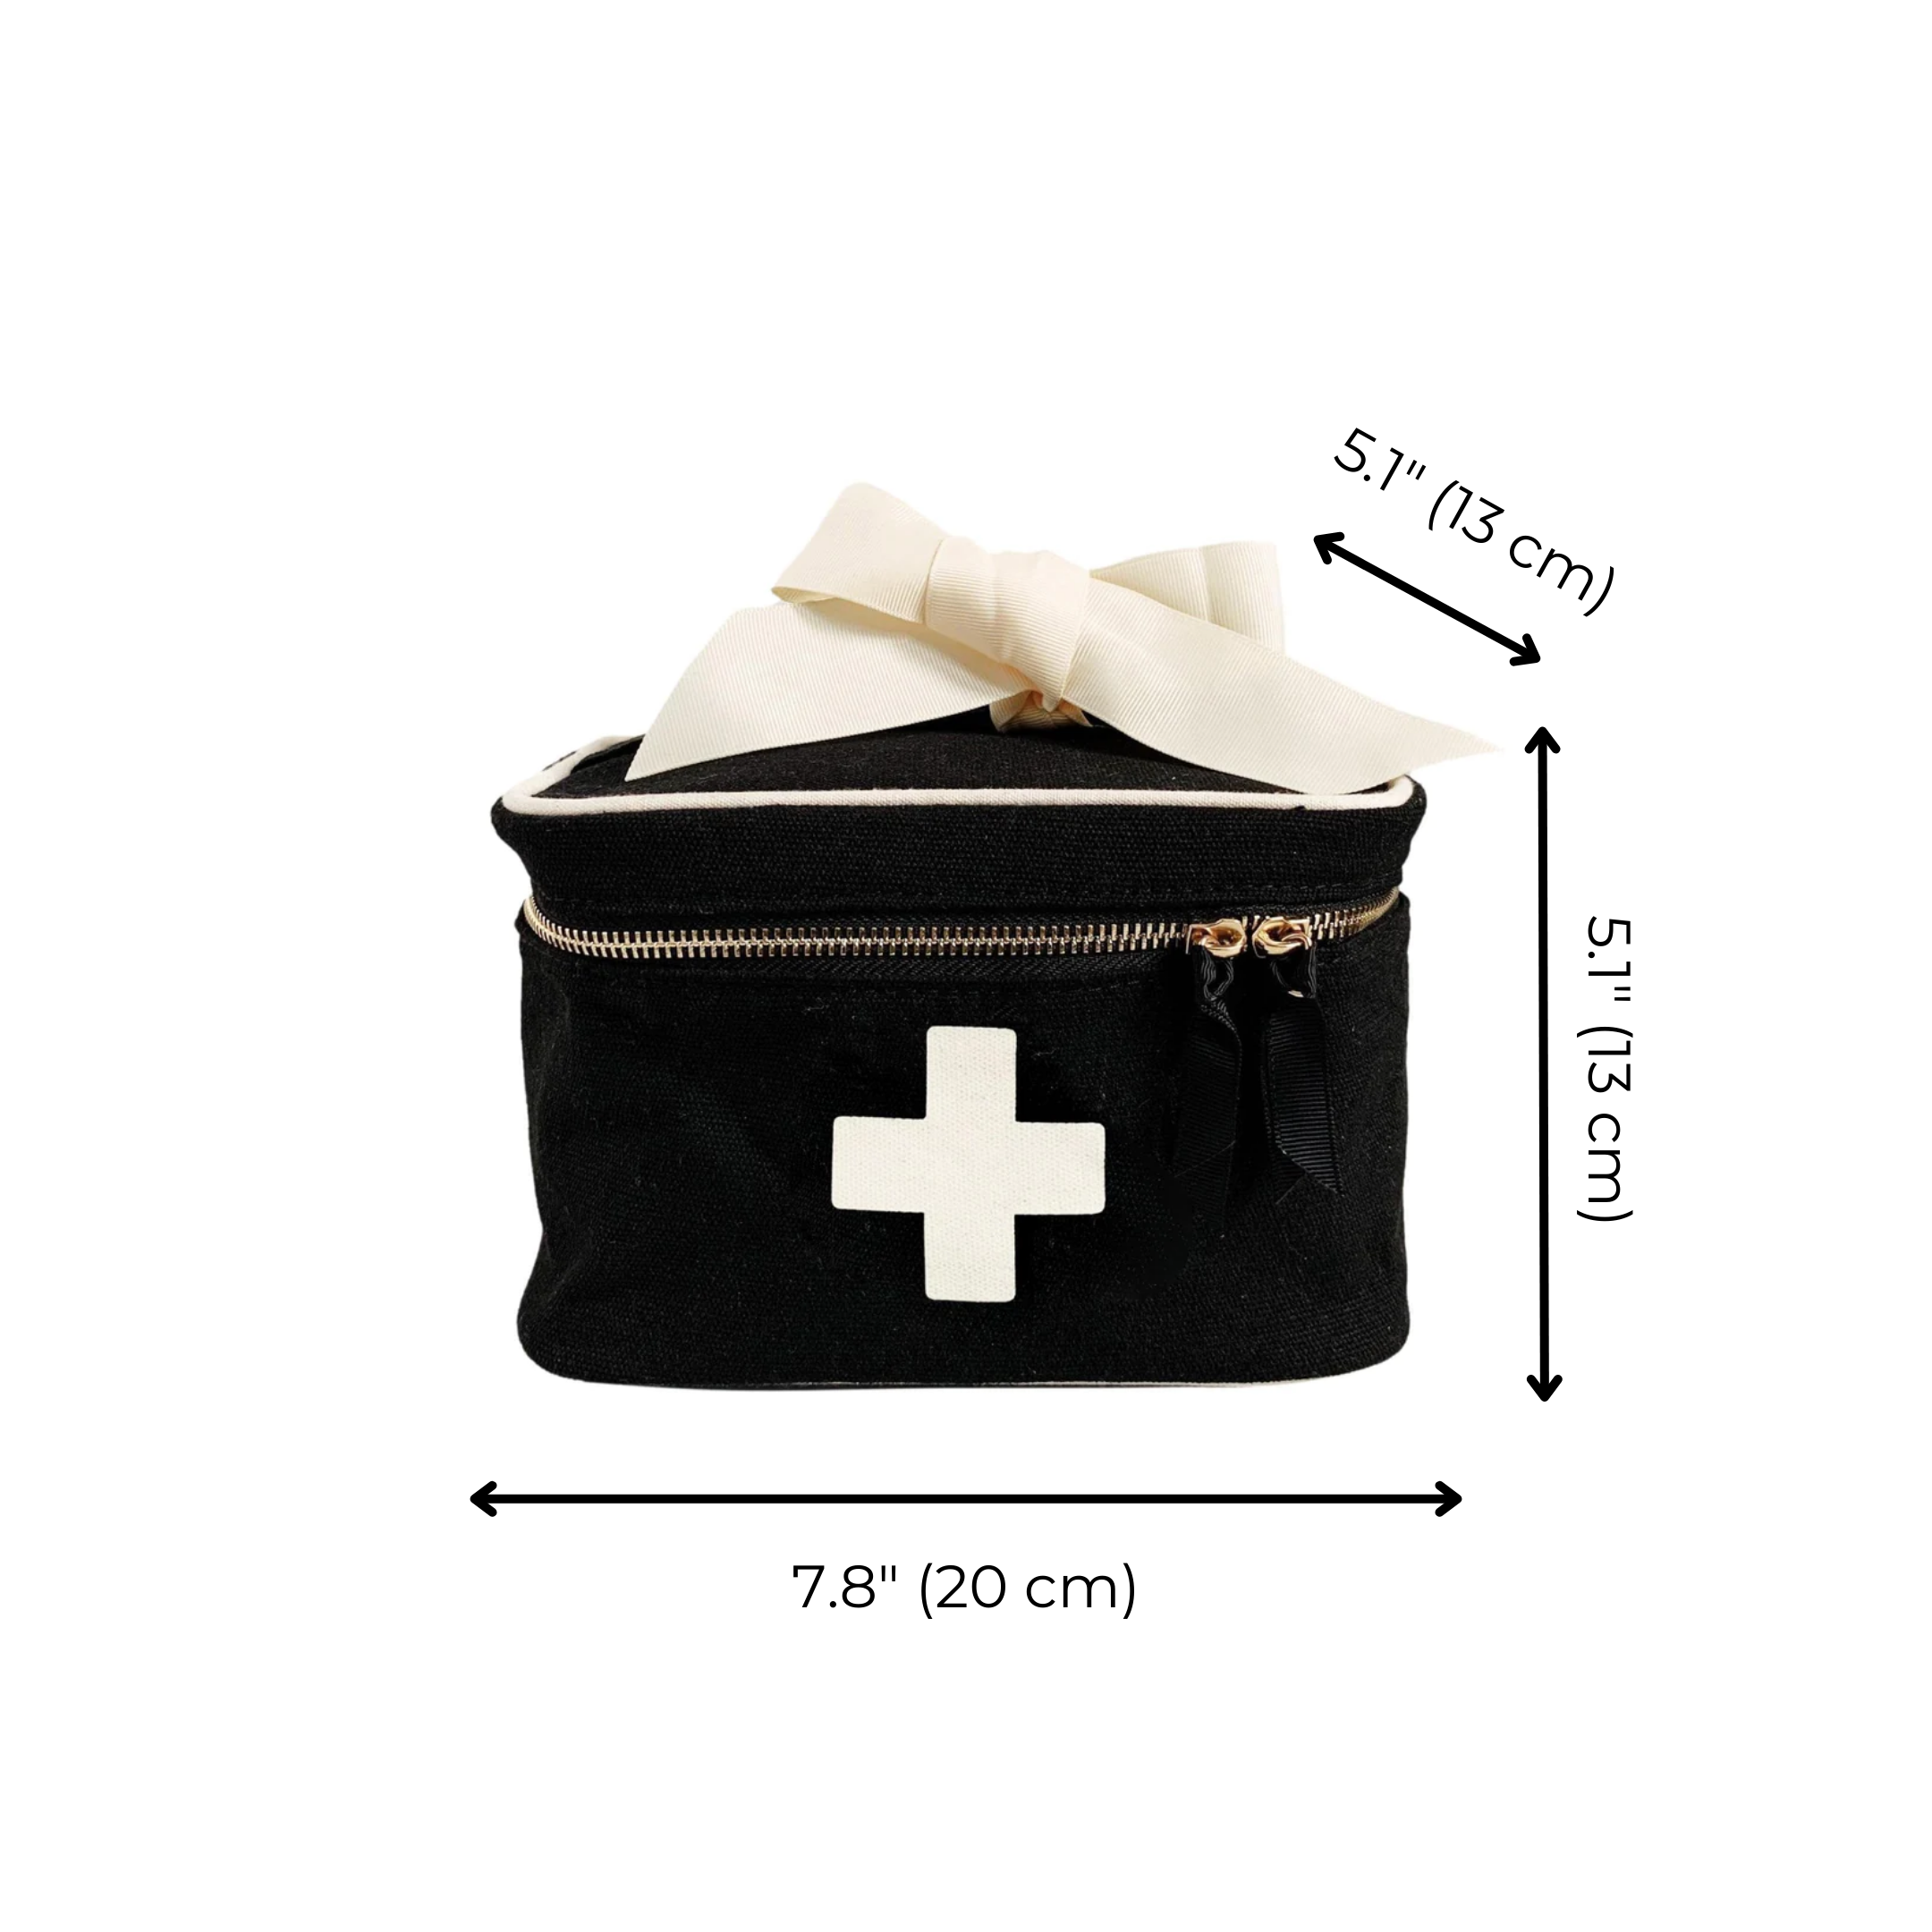 Meds and First Aid Storage Box, Black | Bag-all